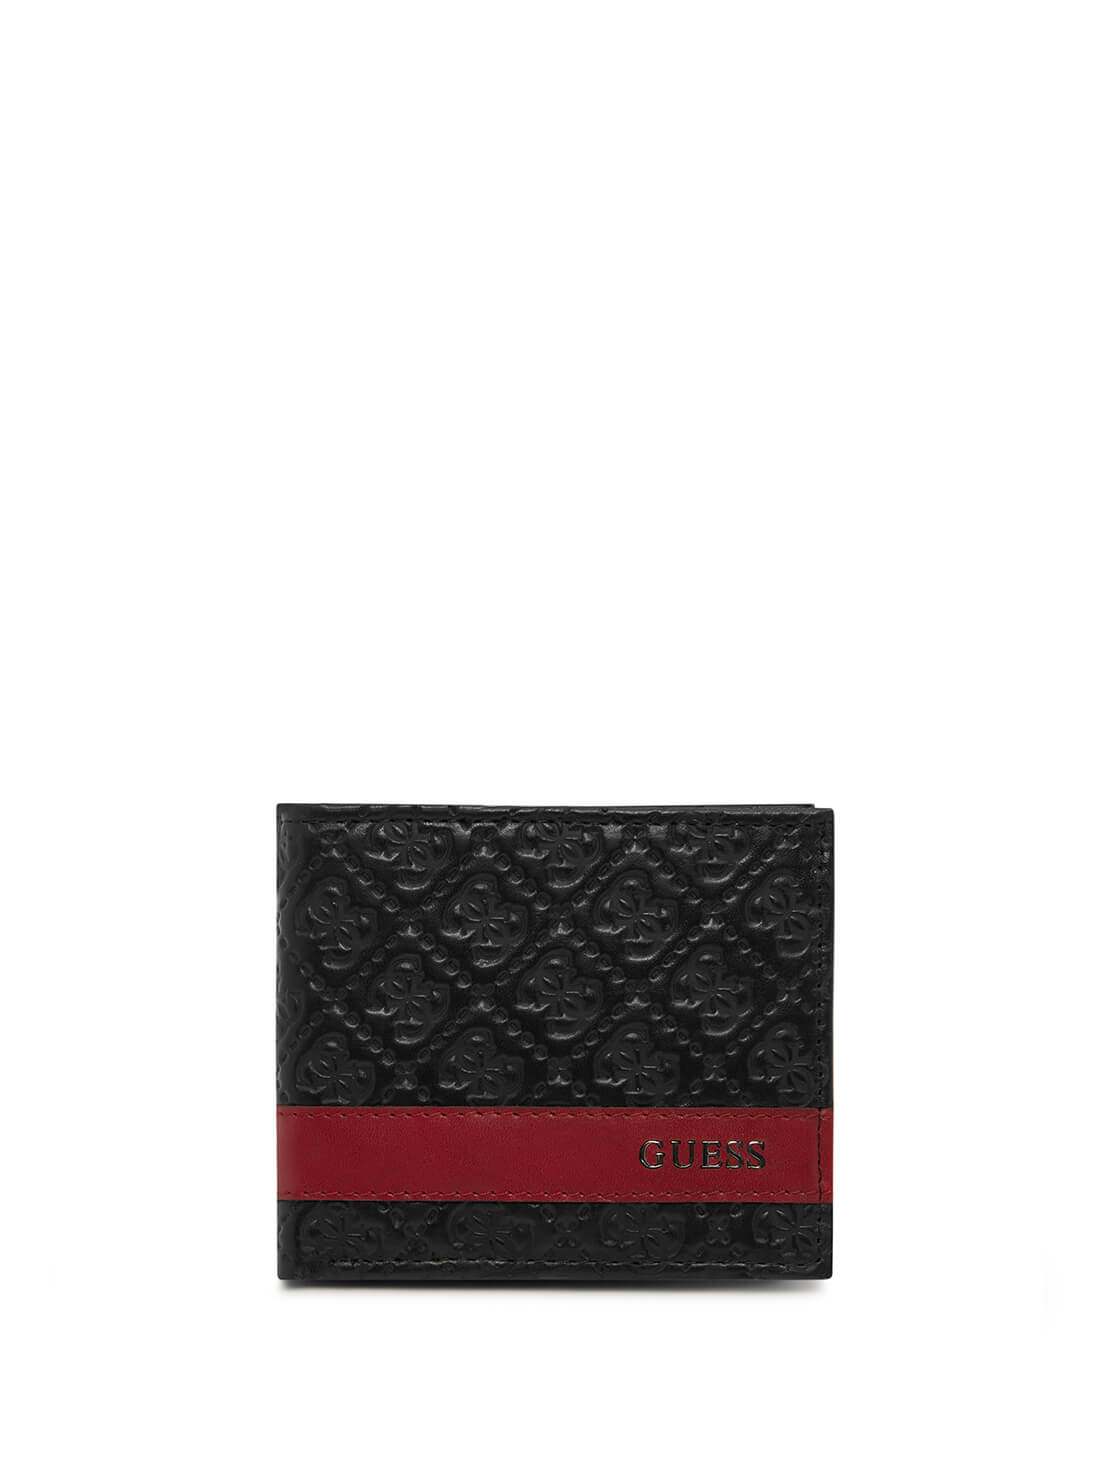 GUESS Men's Red Black Quattro G Slimfold Wallet 31GUE13215 Front View